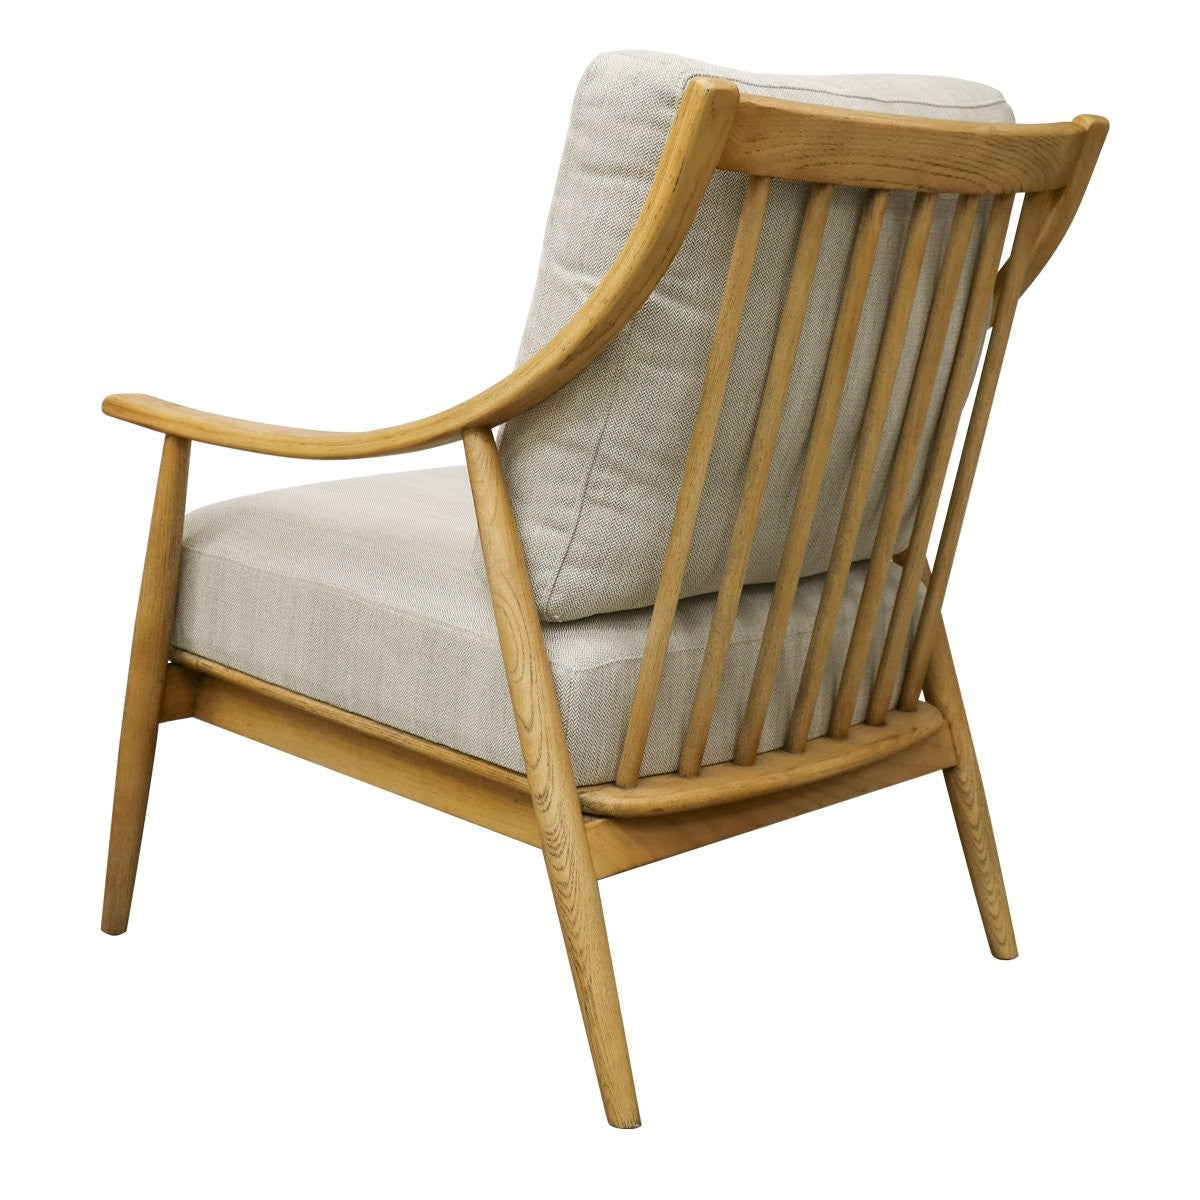 Greer Occasional Chair - Oatmeal